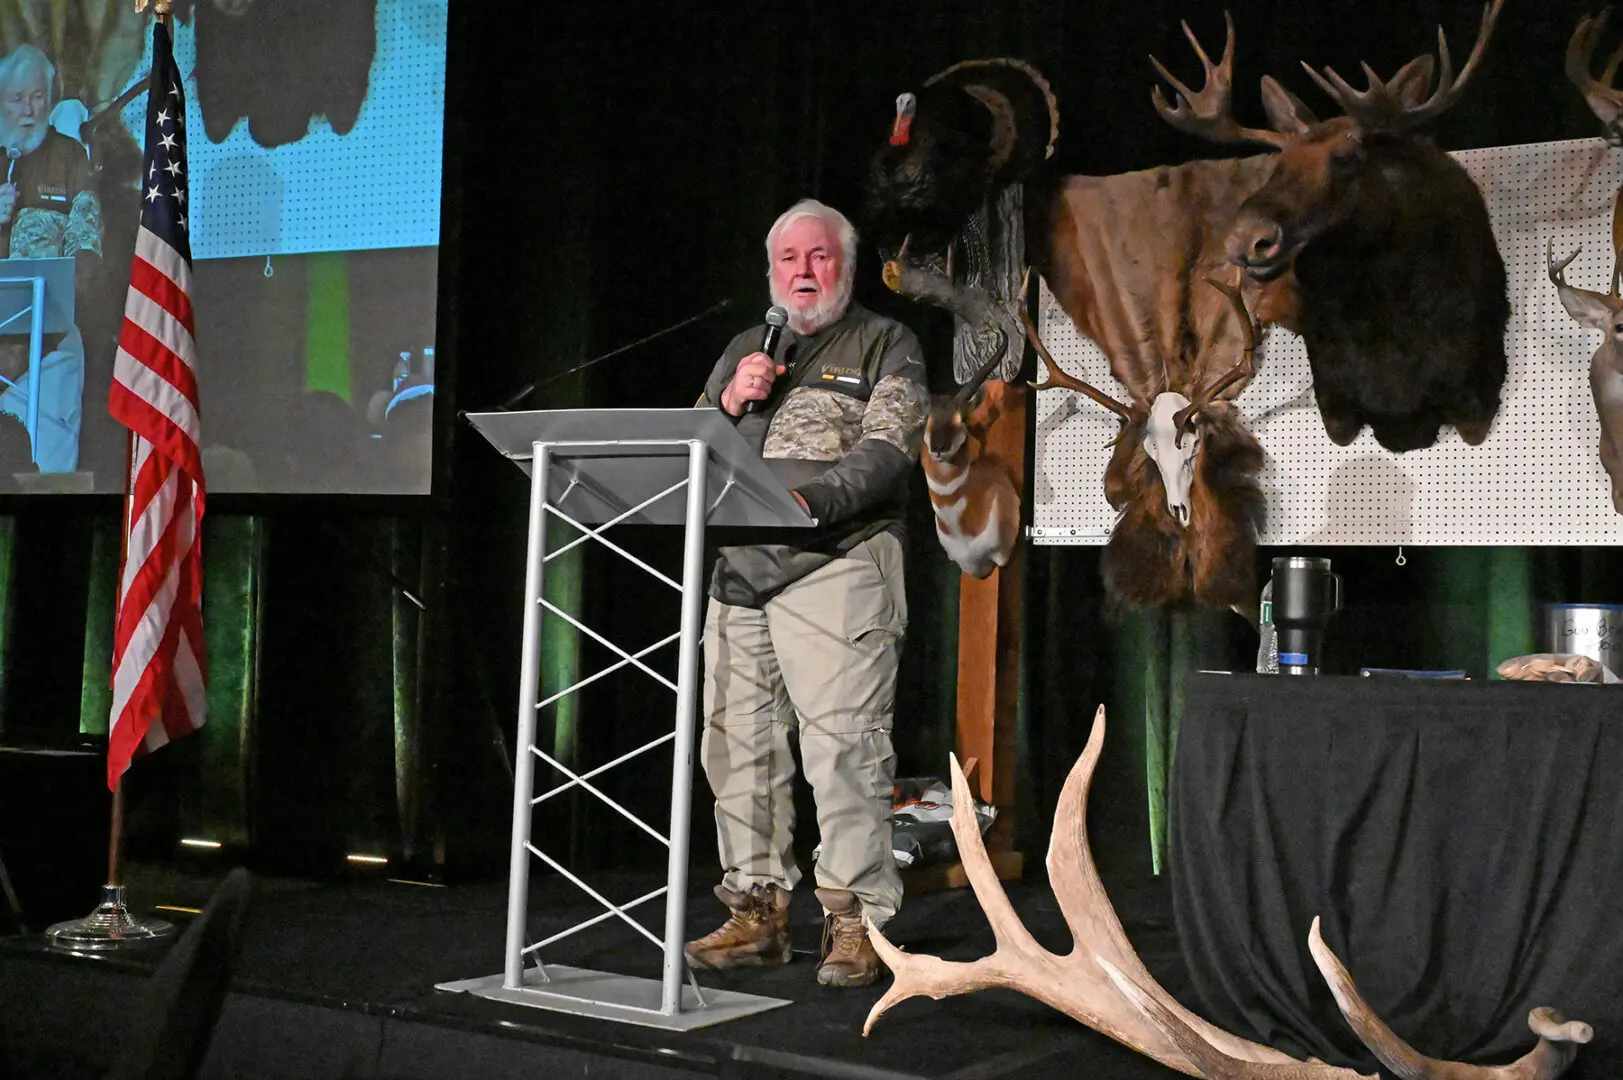 A man standing at a podium with an animal head on the wall behind him.